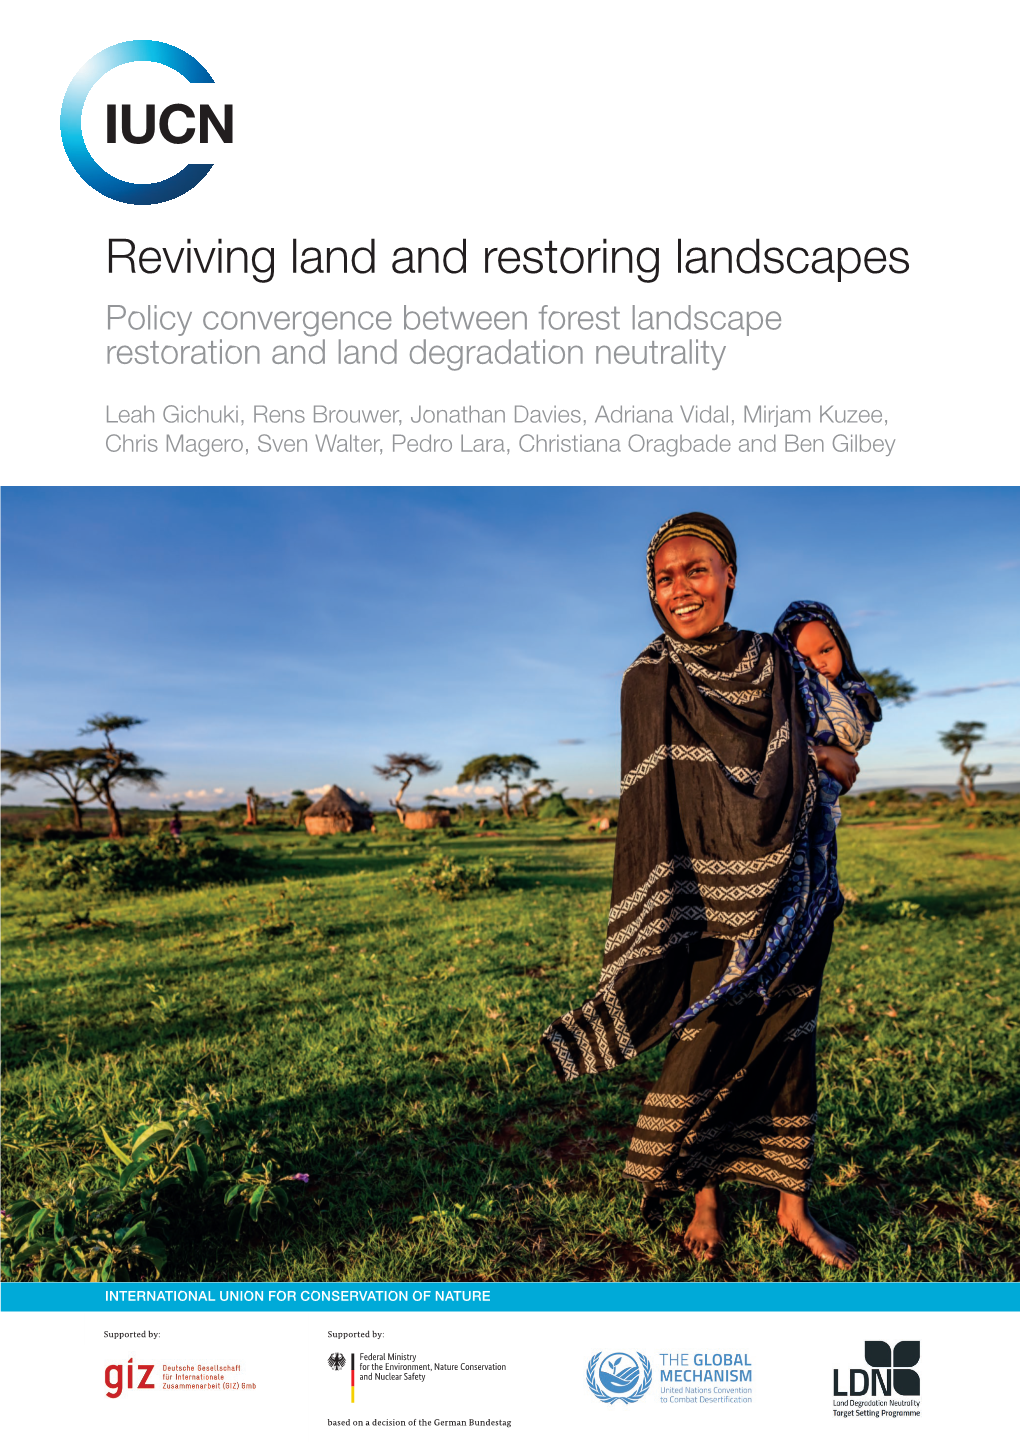 Reviving Land and Restoring Landscapes Policy Convergence Between Forest Landscape Restoration and Land Degradation Neutrality